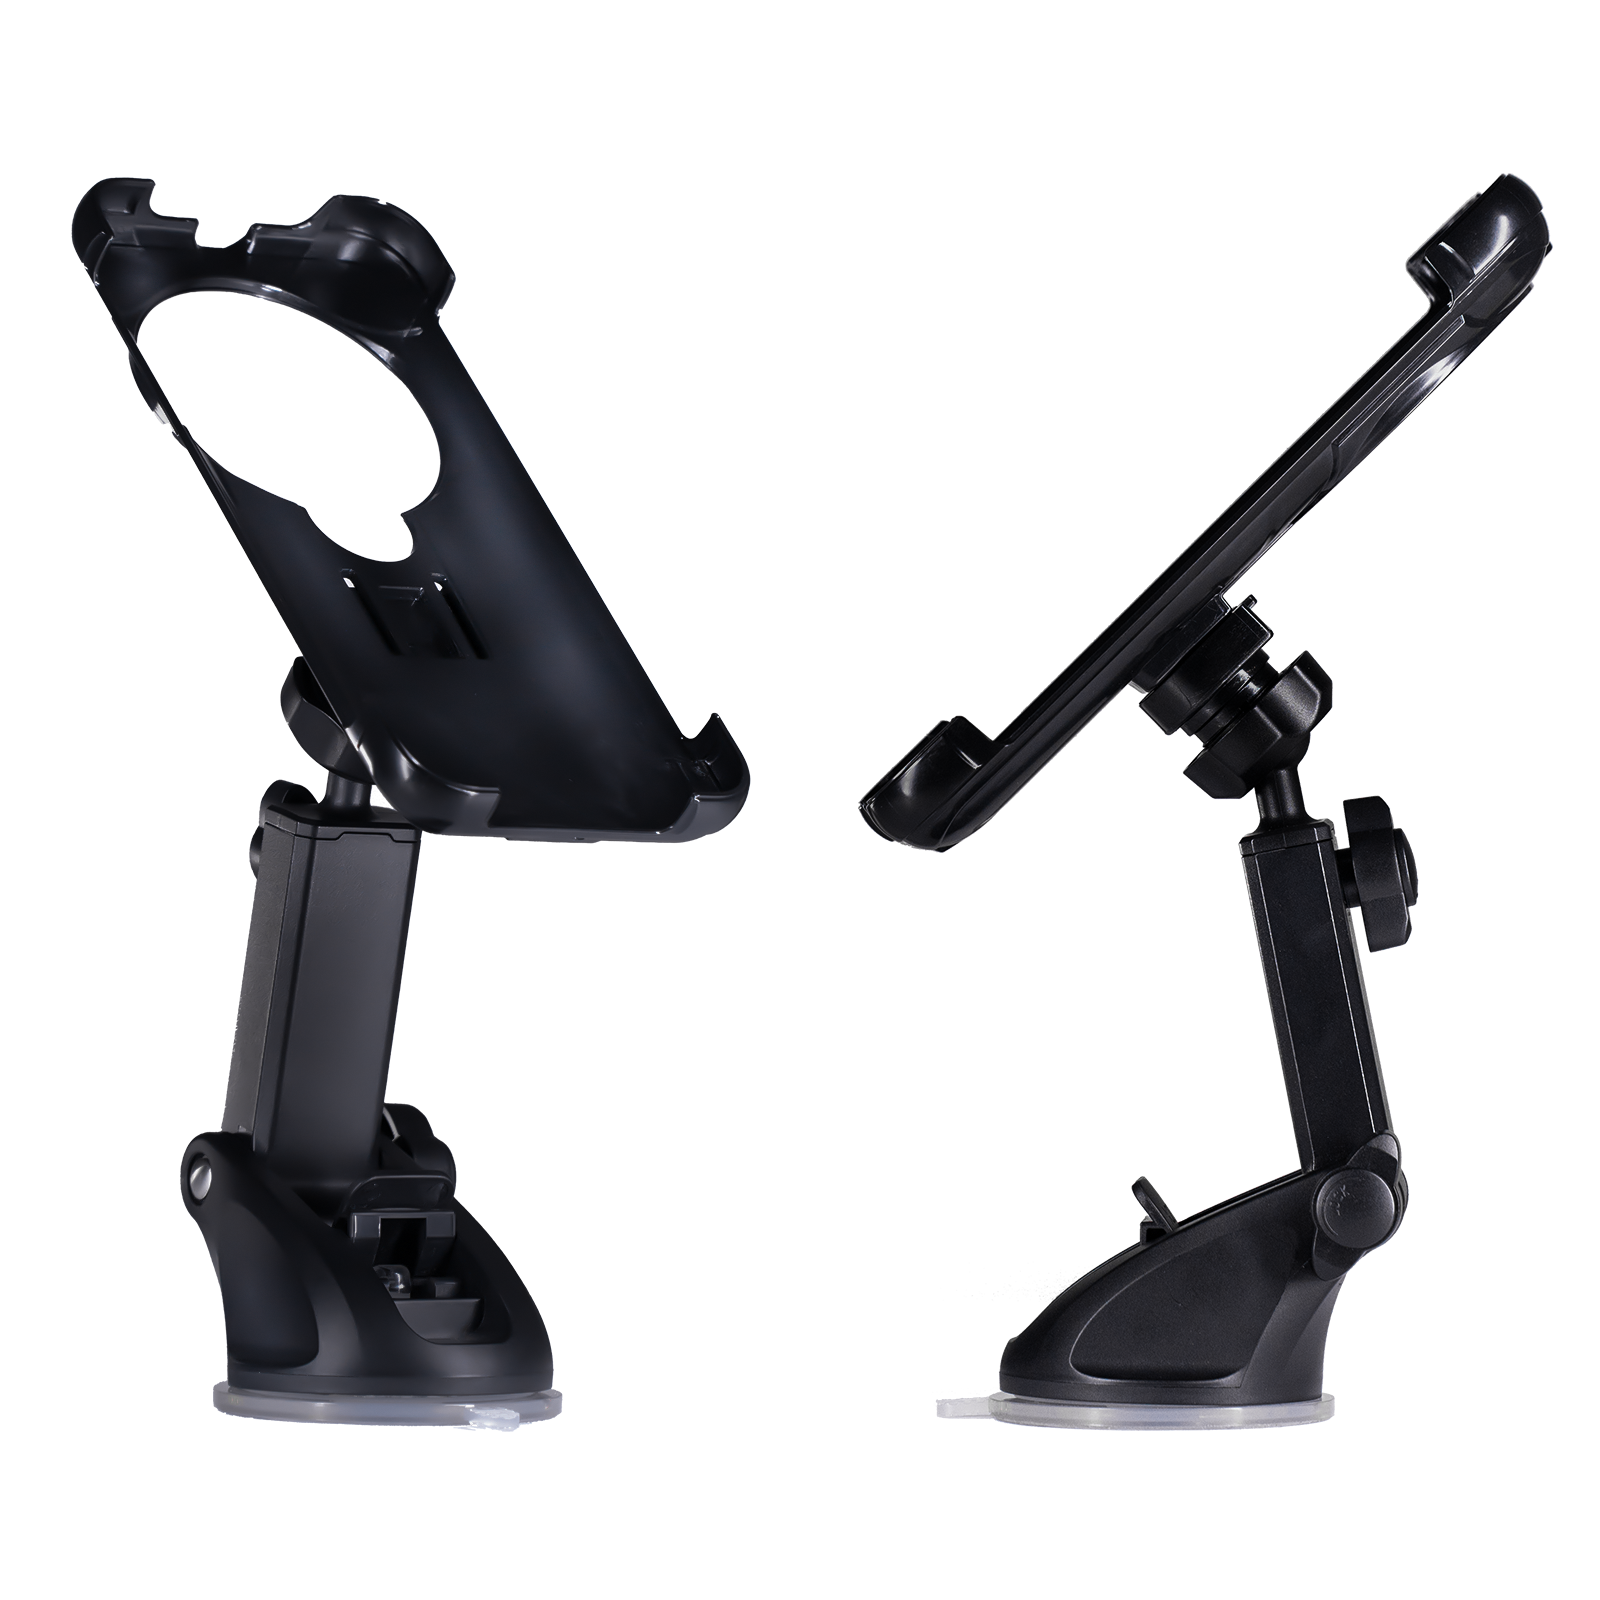 Car Phone Mount for AGM G2 Series